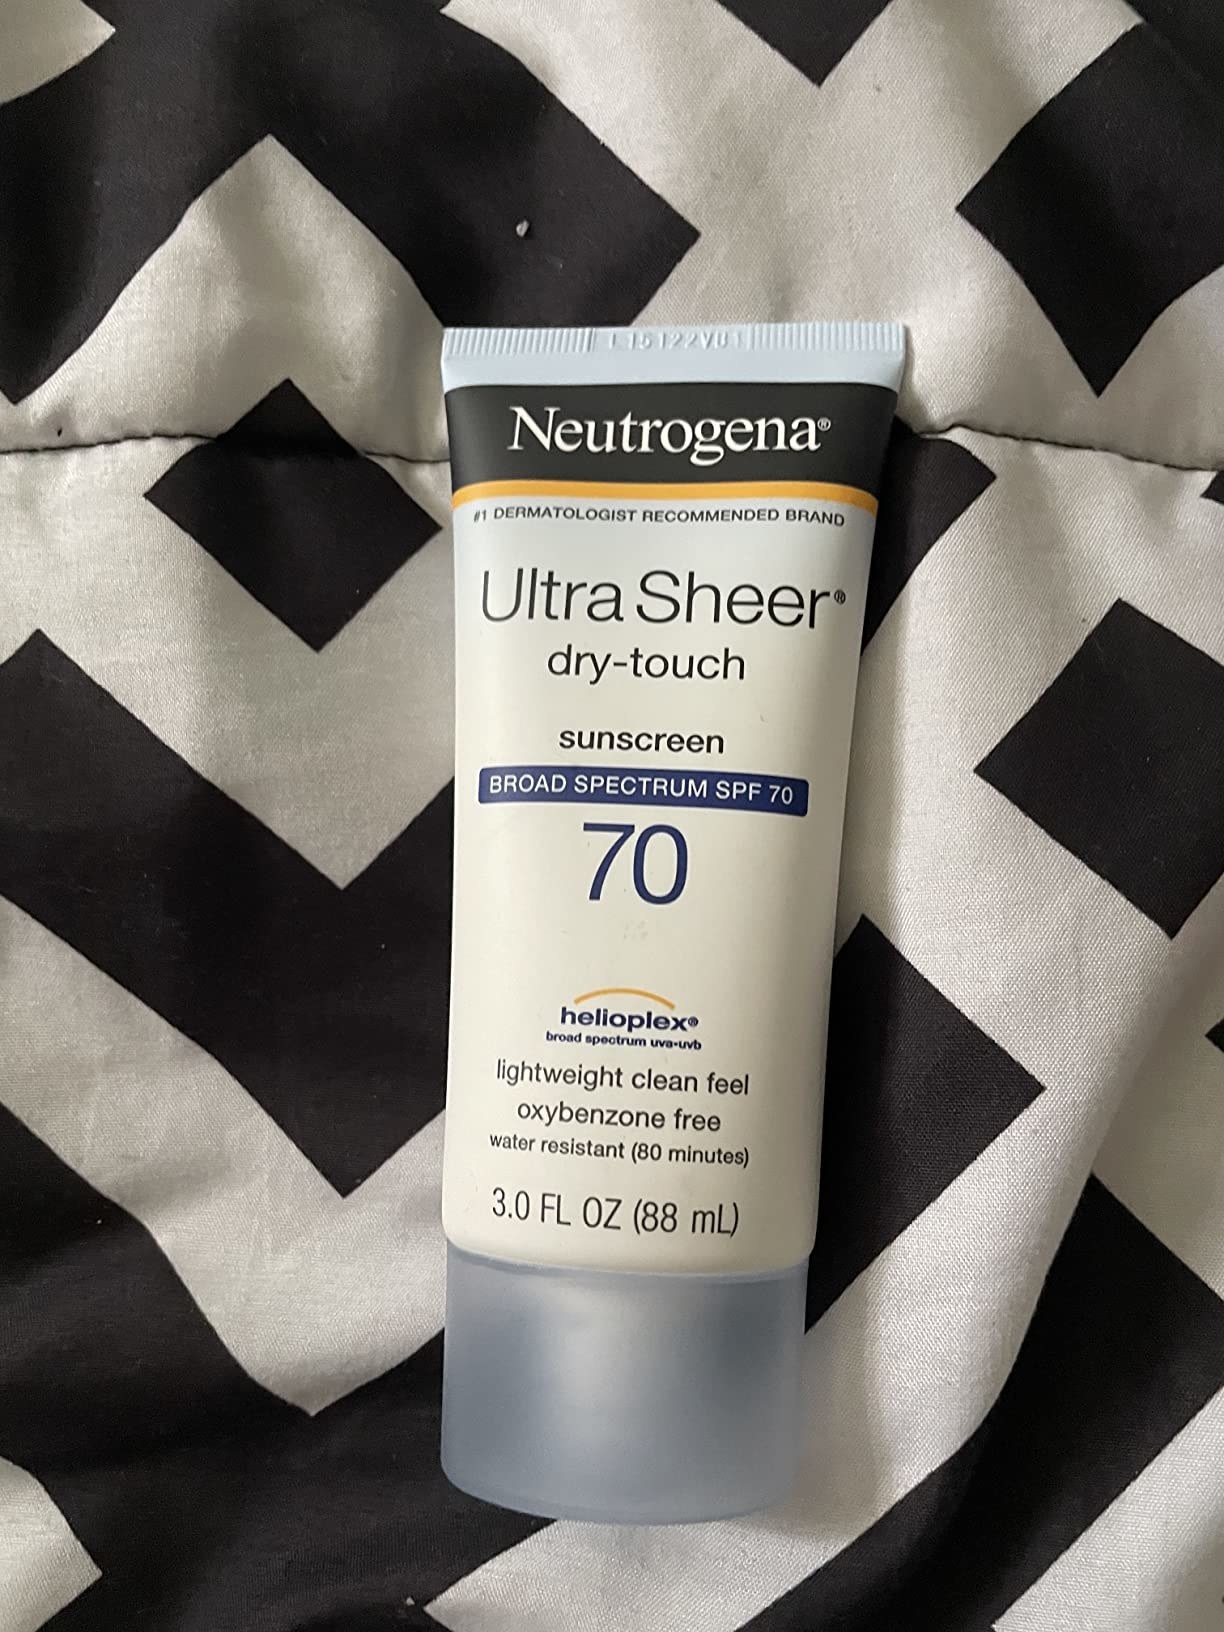 the tube of sunscreen